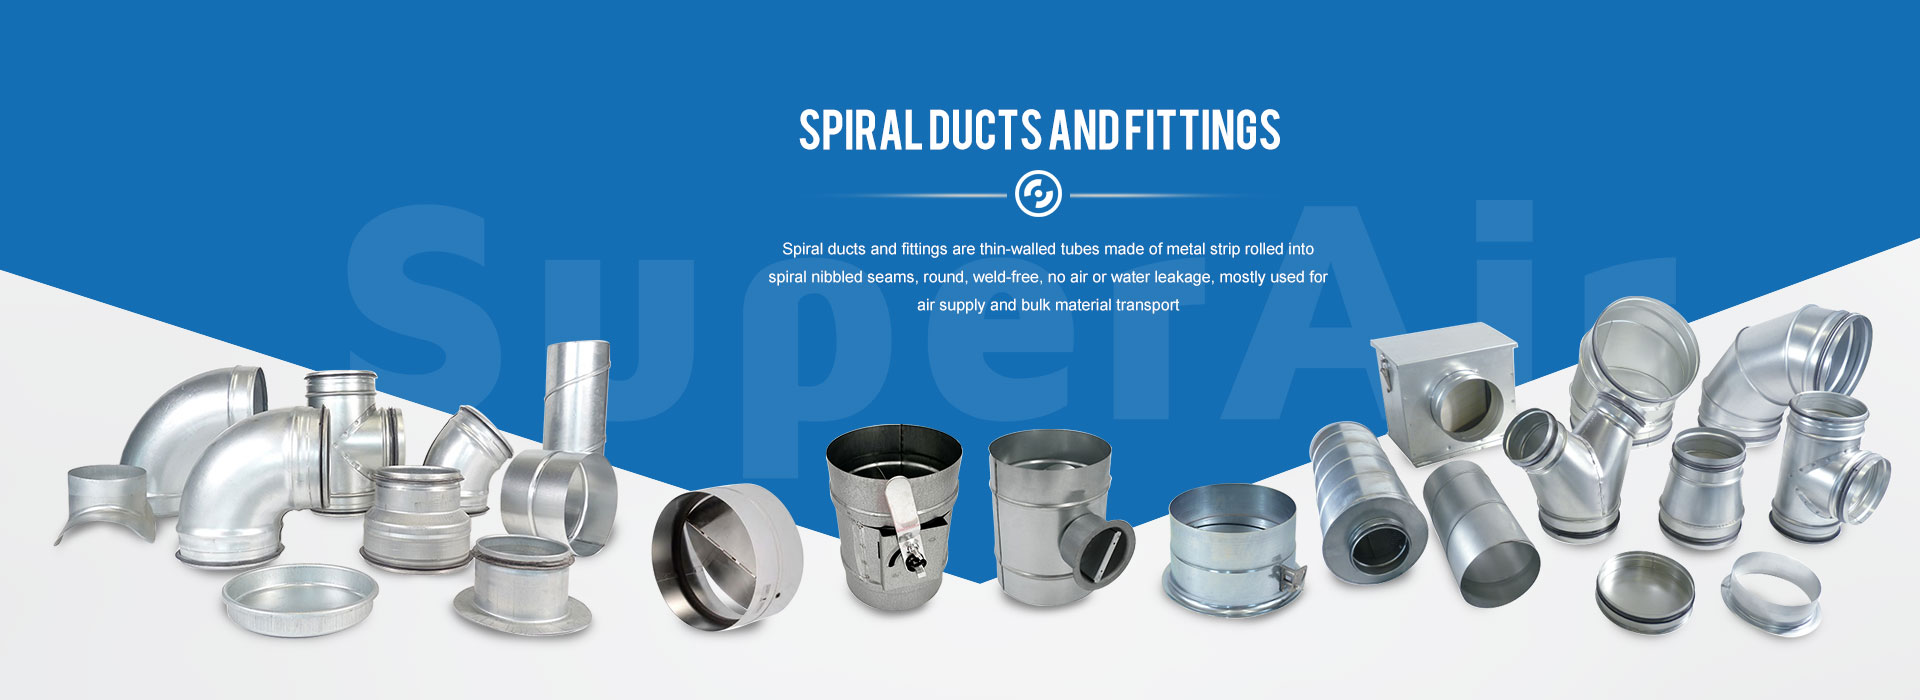 Mga Manufacturer ng Spiral Ducts and Fittings